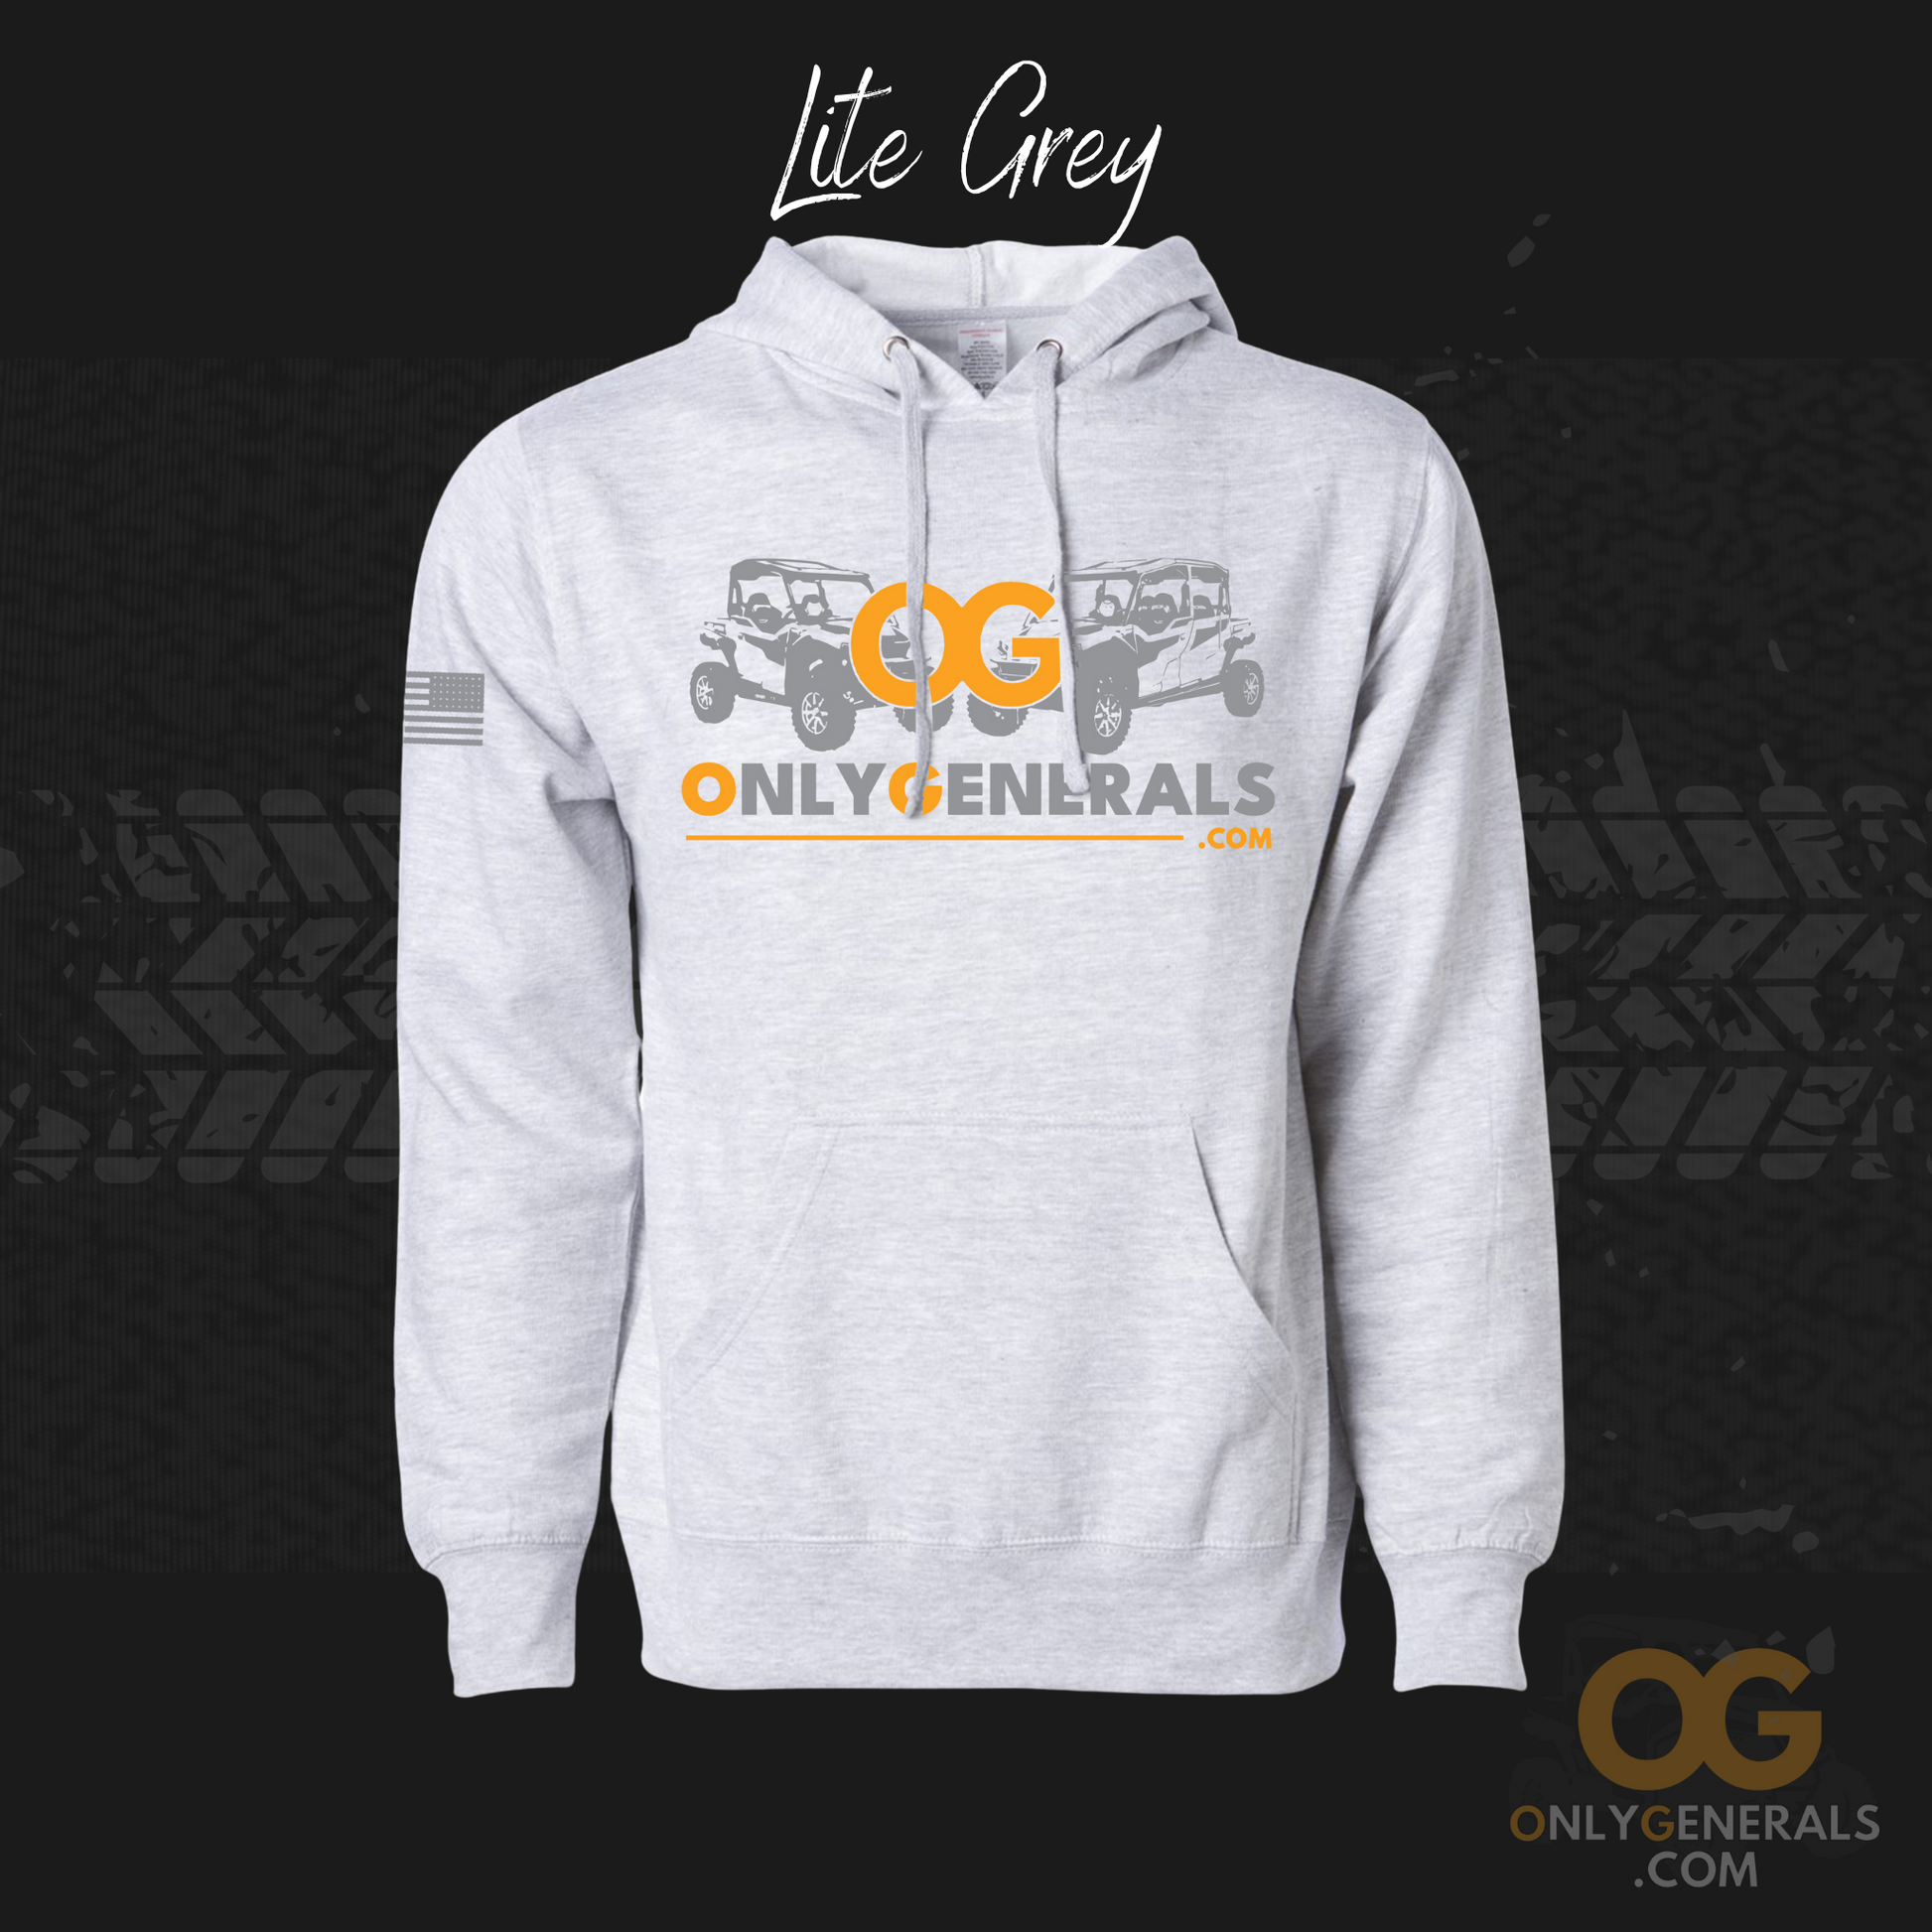 OnlyGenerals wearables showing the lite grey hoodie with the OG logo across the front and flag on sleeve